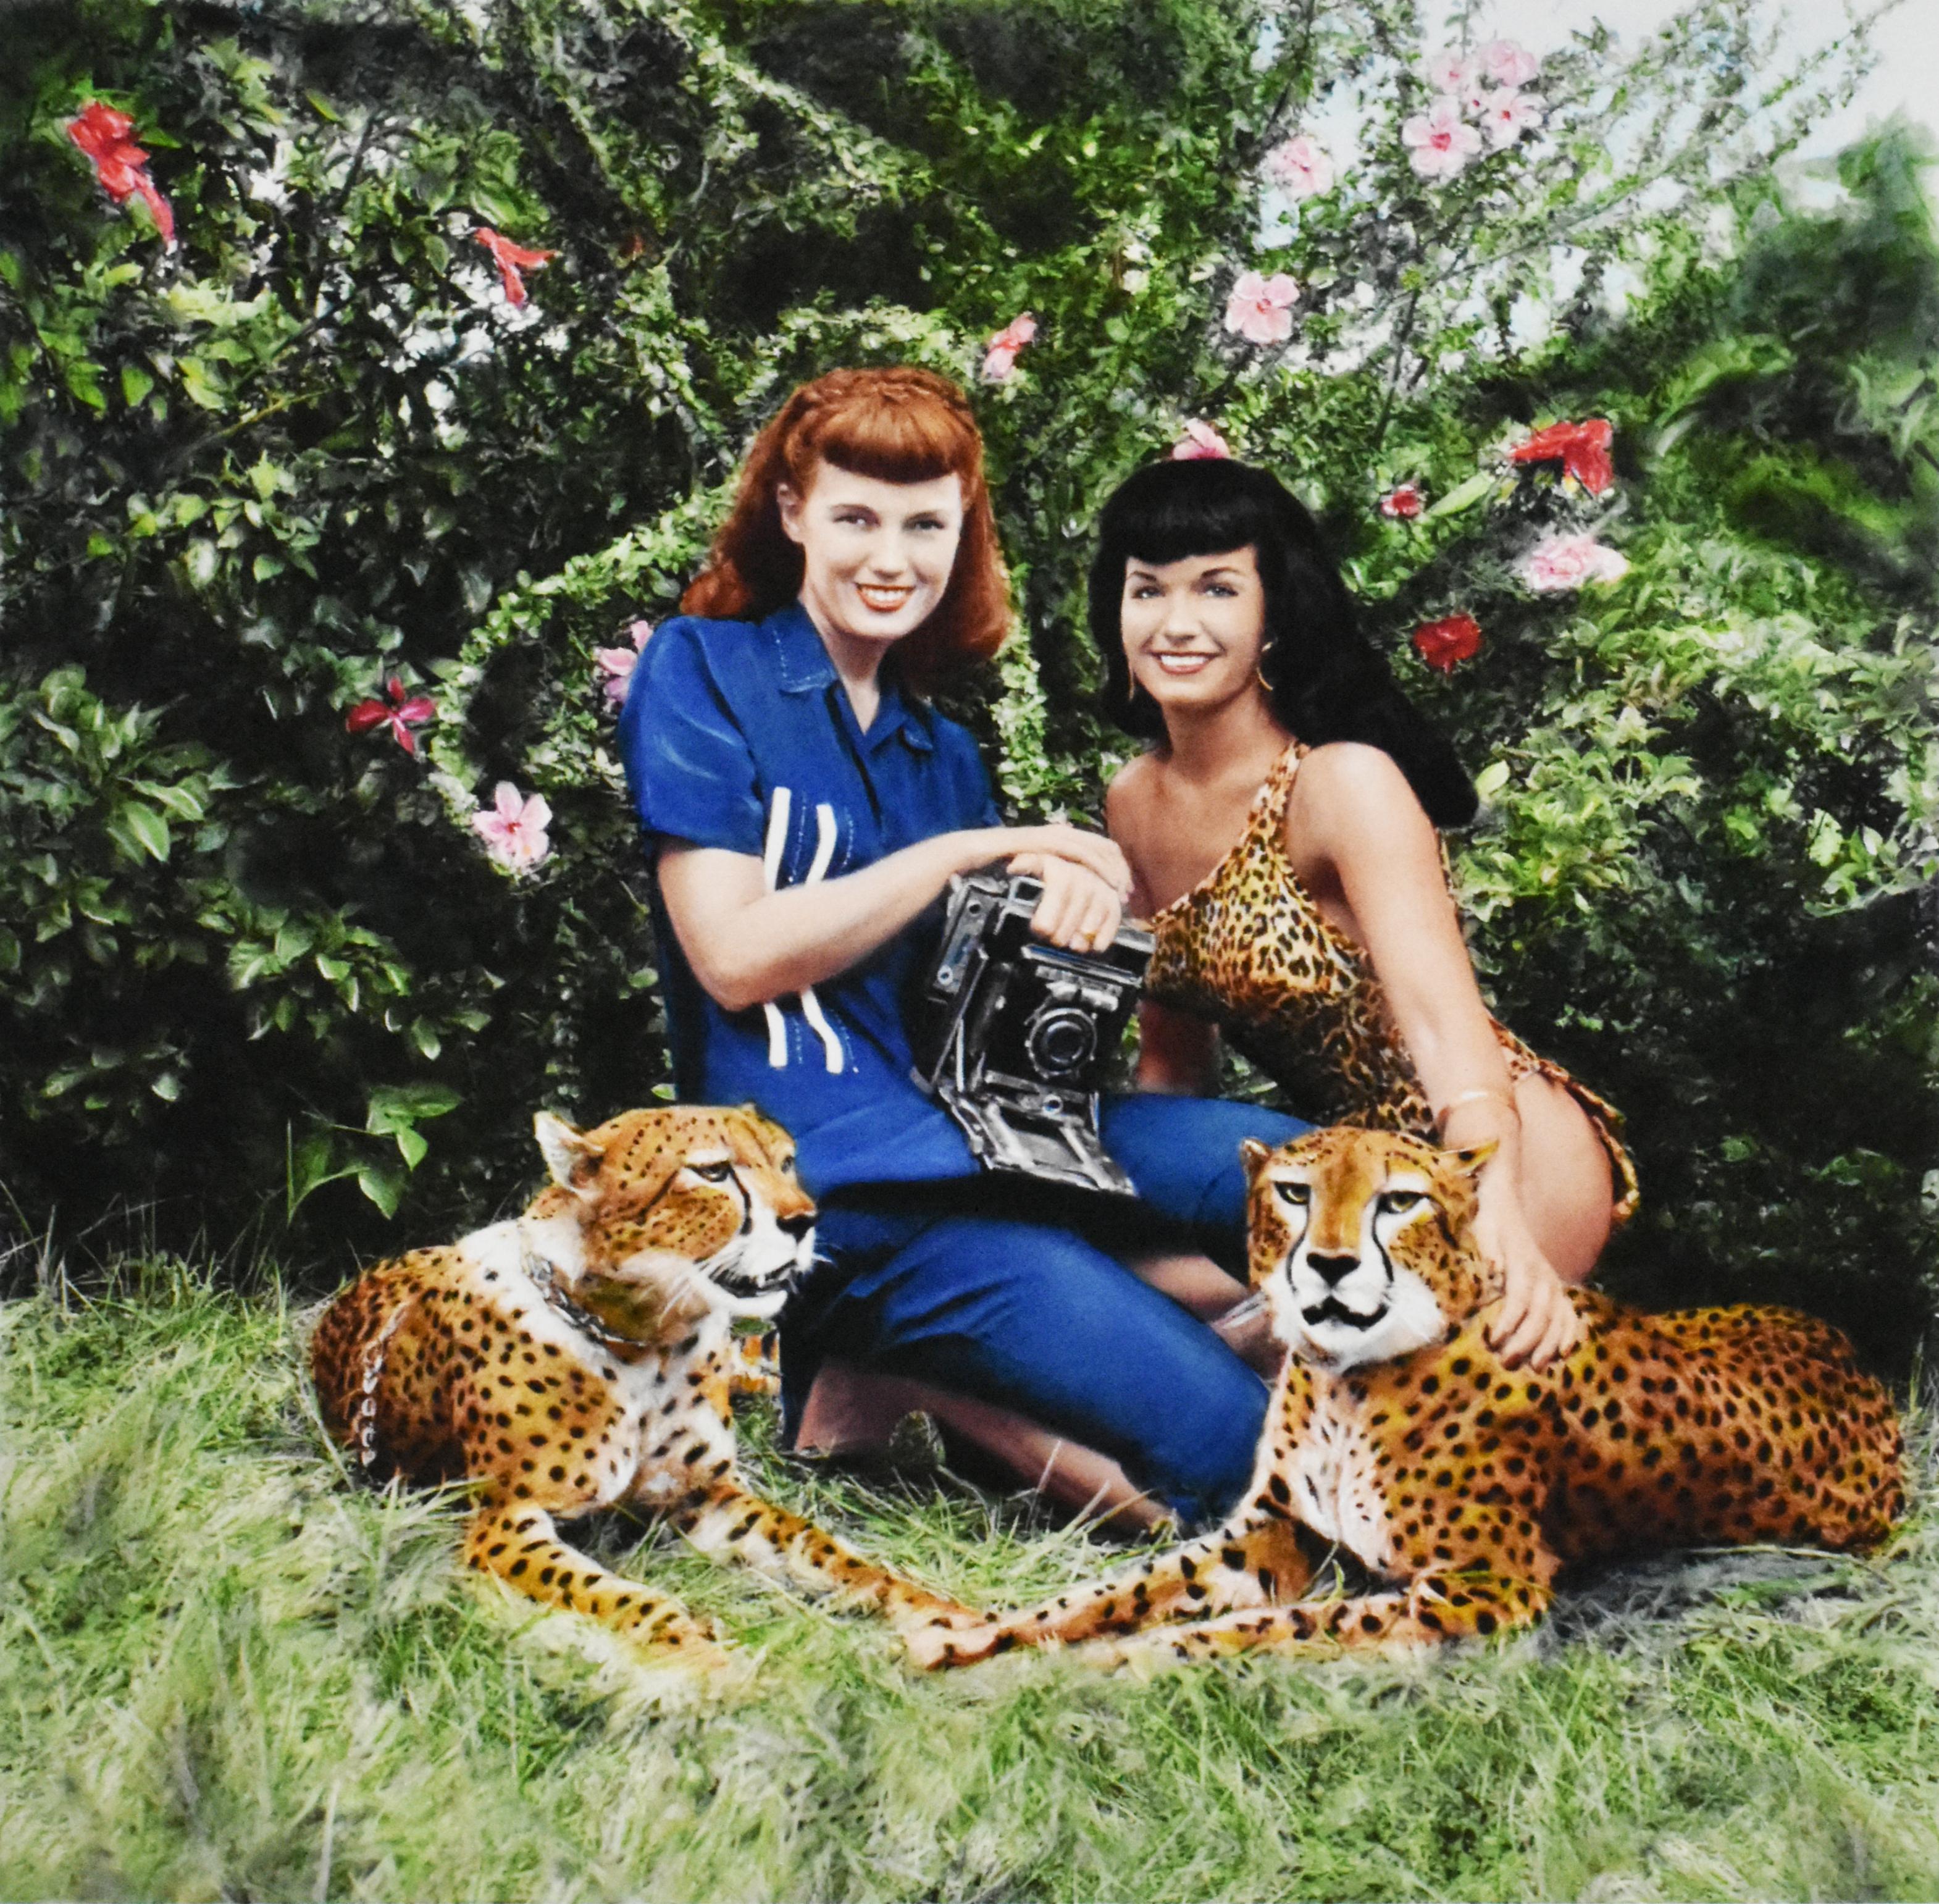 Bettie Page and Cheetahs at Africa USA, Boca Raton, Florida, 1954 - Photograph by Bunny Yeager